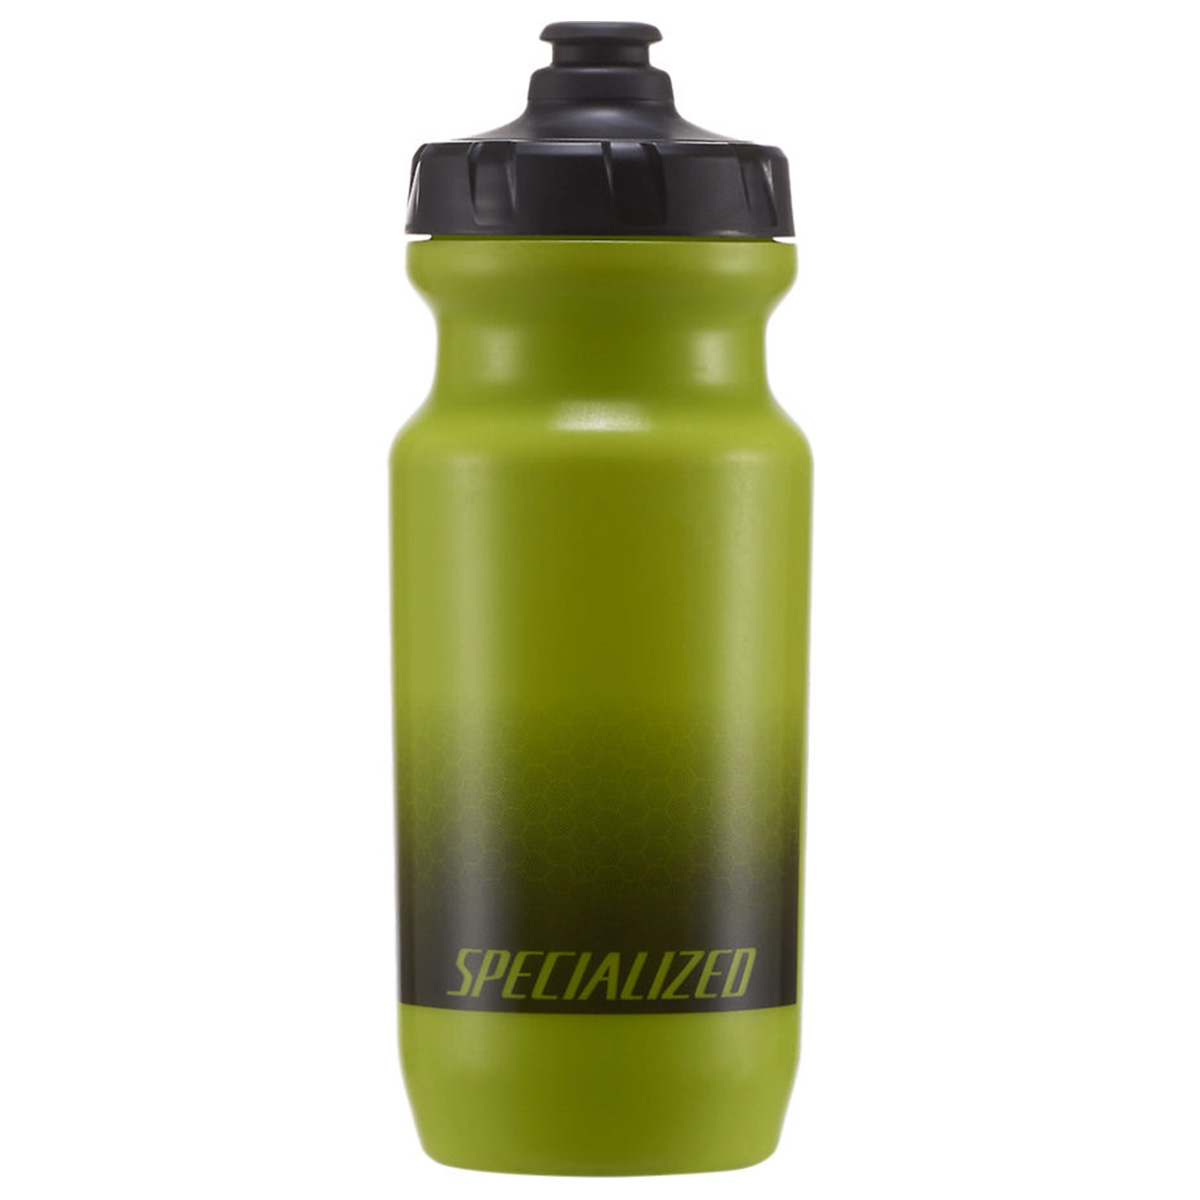 BOUTEILLE SPECIALIZED LITTLE BIG MOUTH 21 OZ - VERT